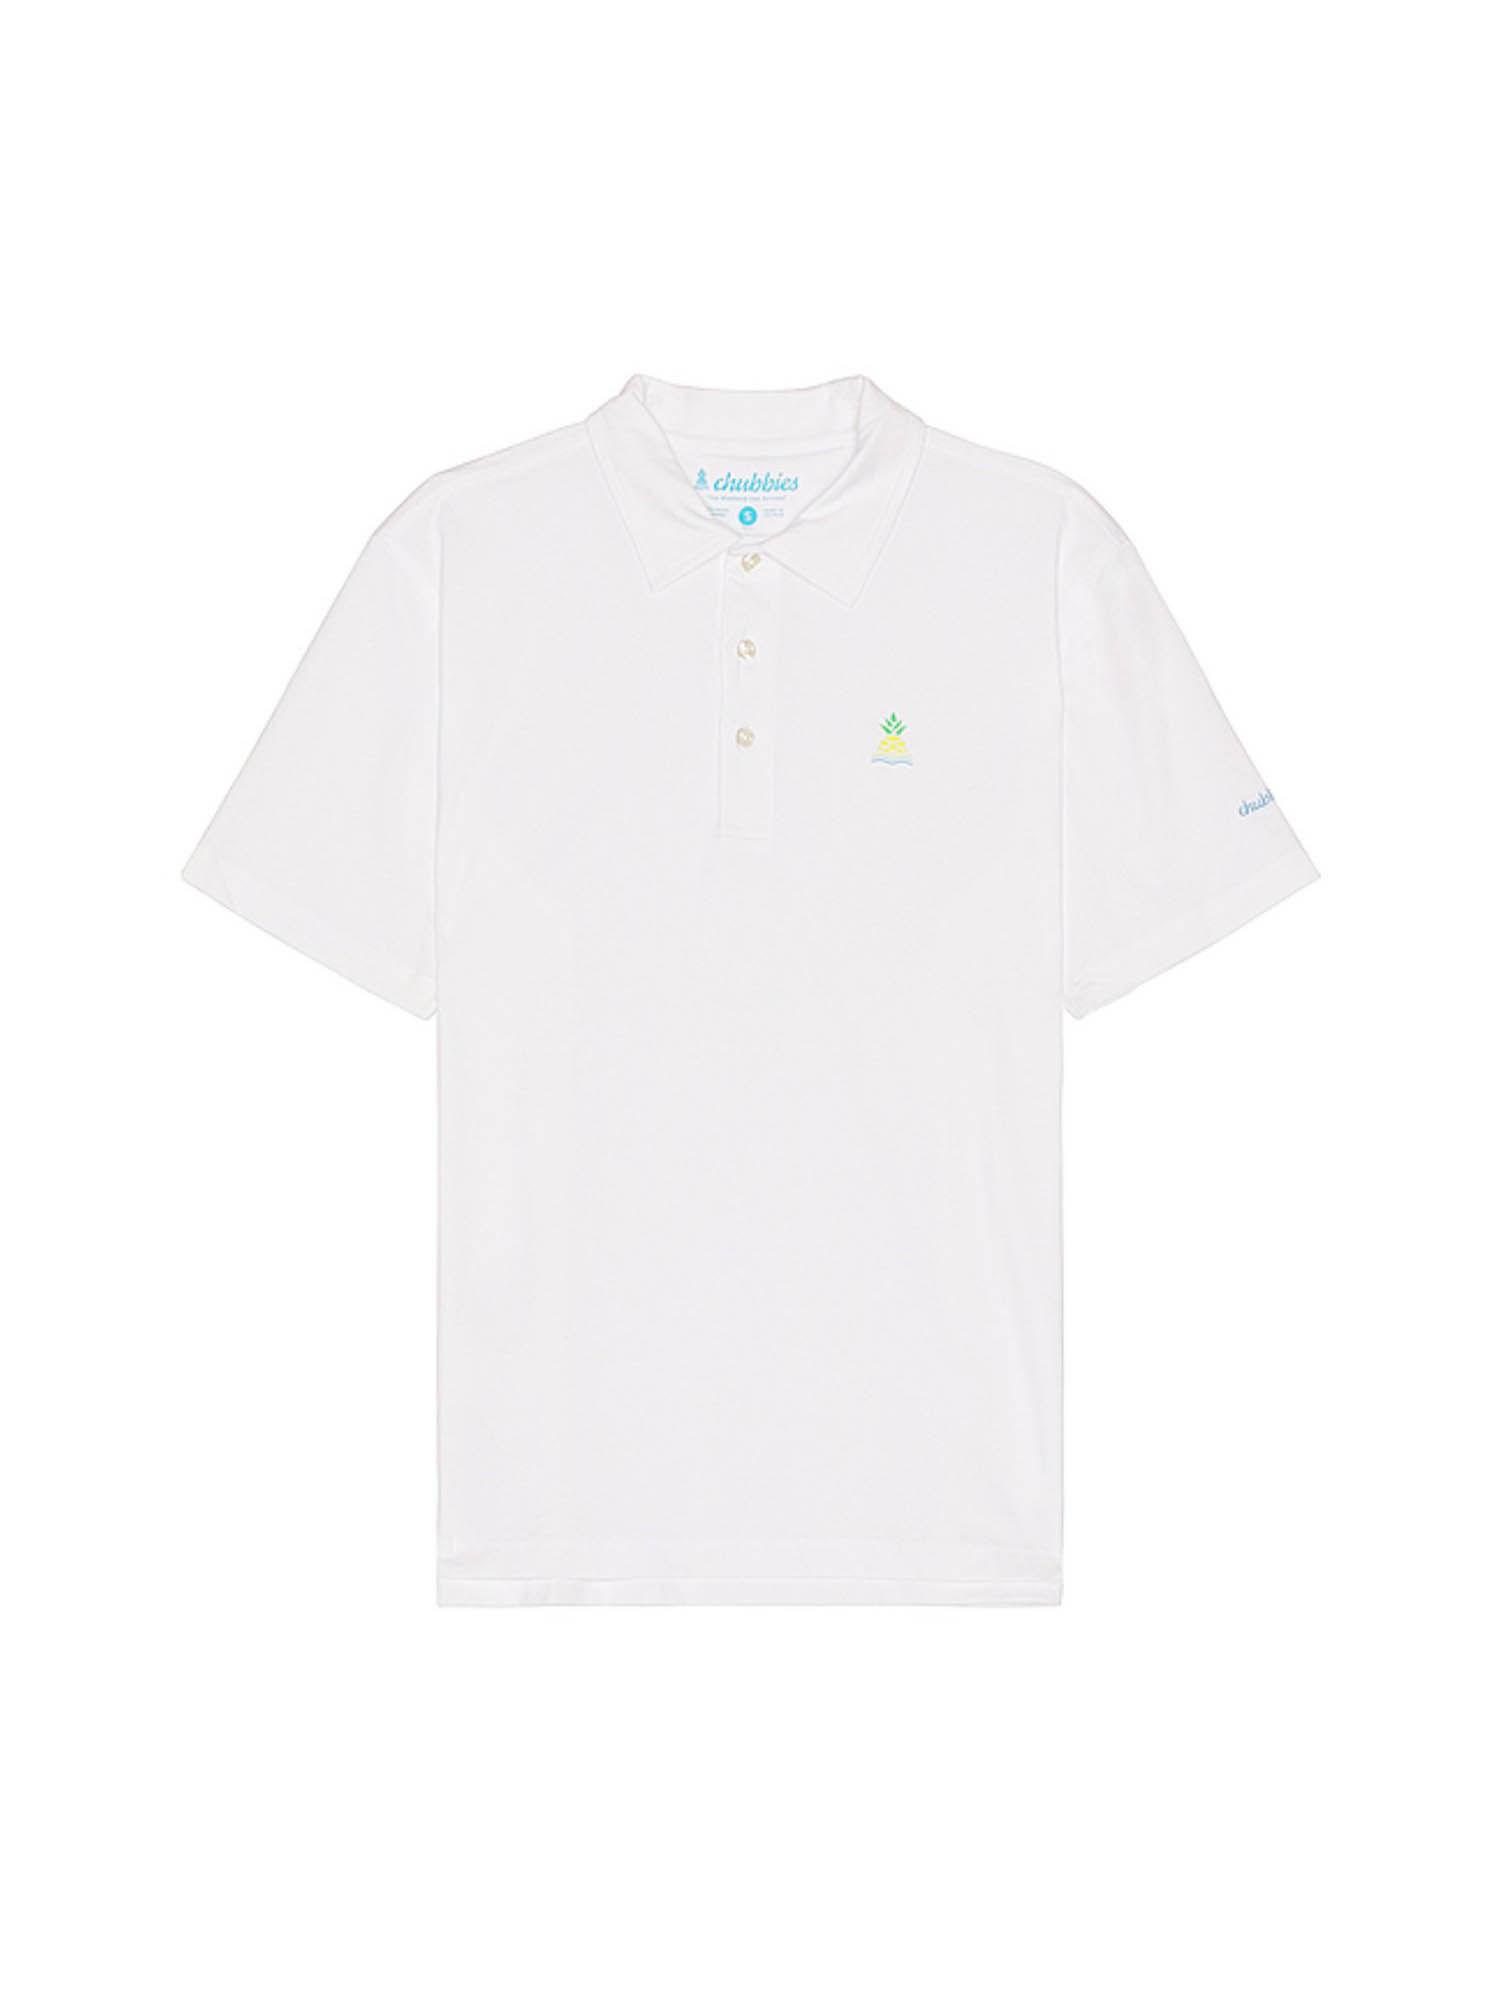 the complete outfit performance polo